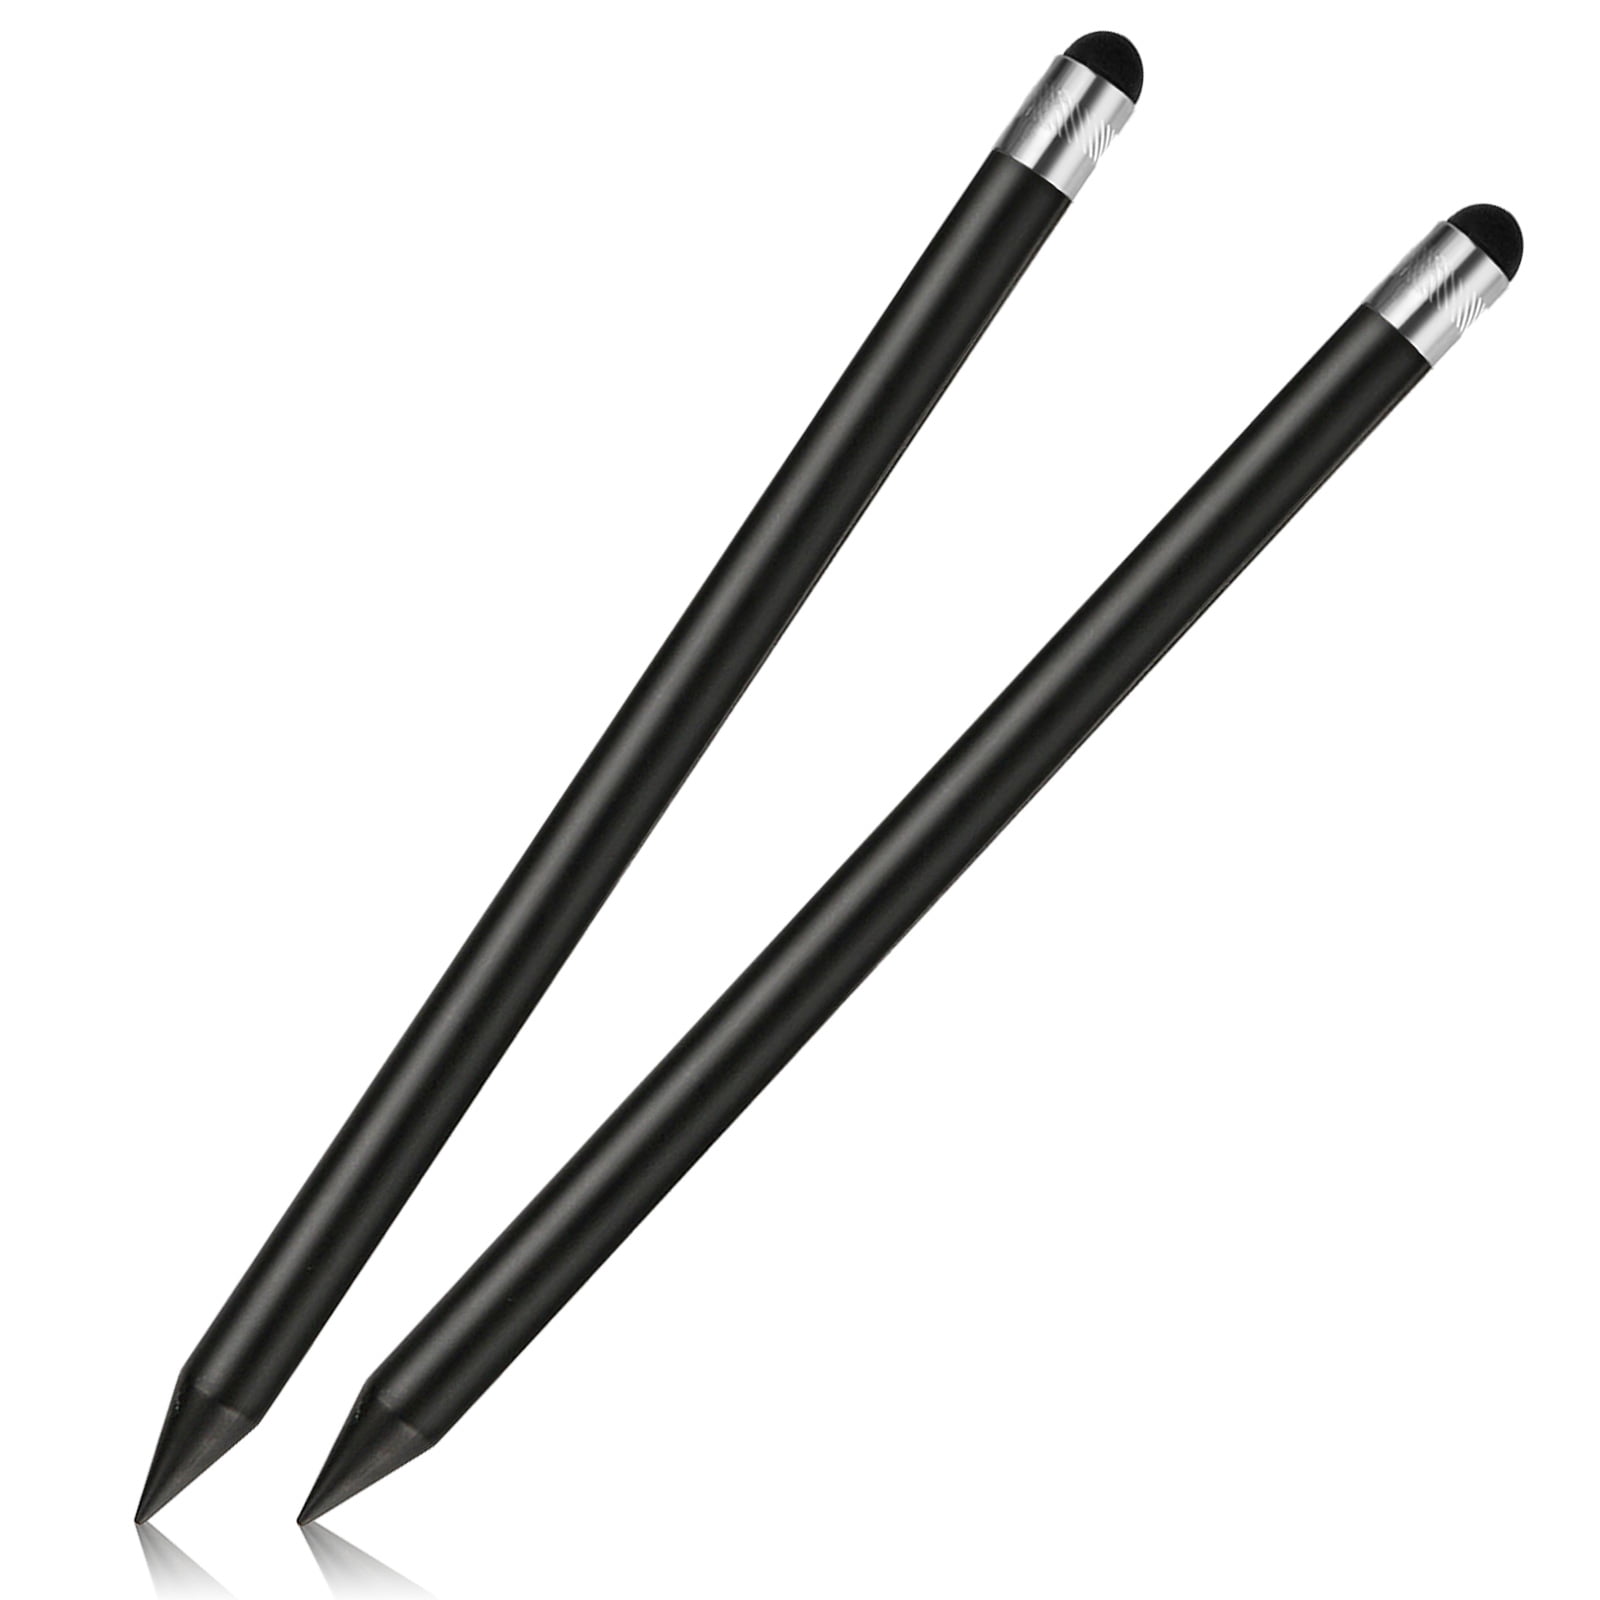 Stylus Pen for Touch Screen (3 Pack Two Way High Sensitivity) Universal  Capacitive Pen for iPad iPhone Android Samsung Phone Microsoft Tablet Fine  Point Disc Stylist Pencil Magnetic Cap Fiber Tips 